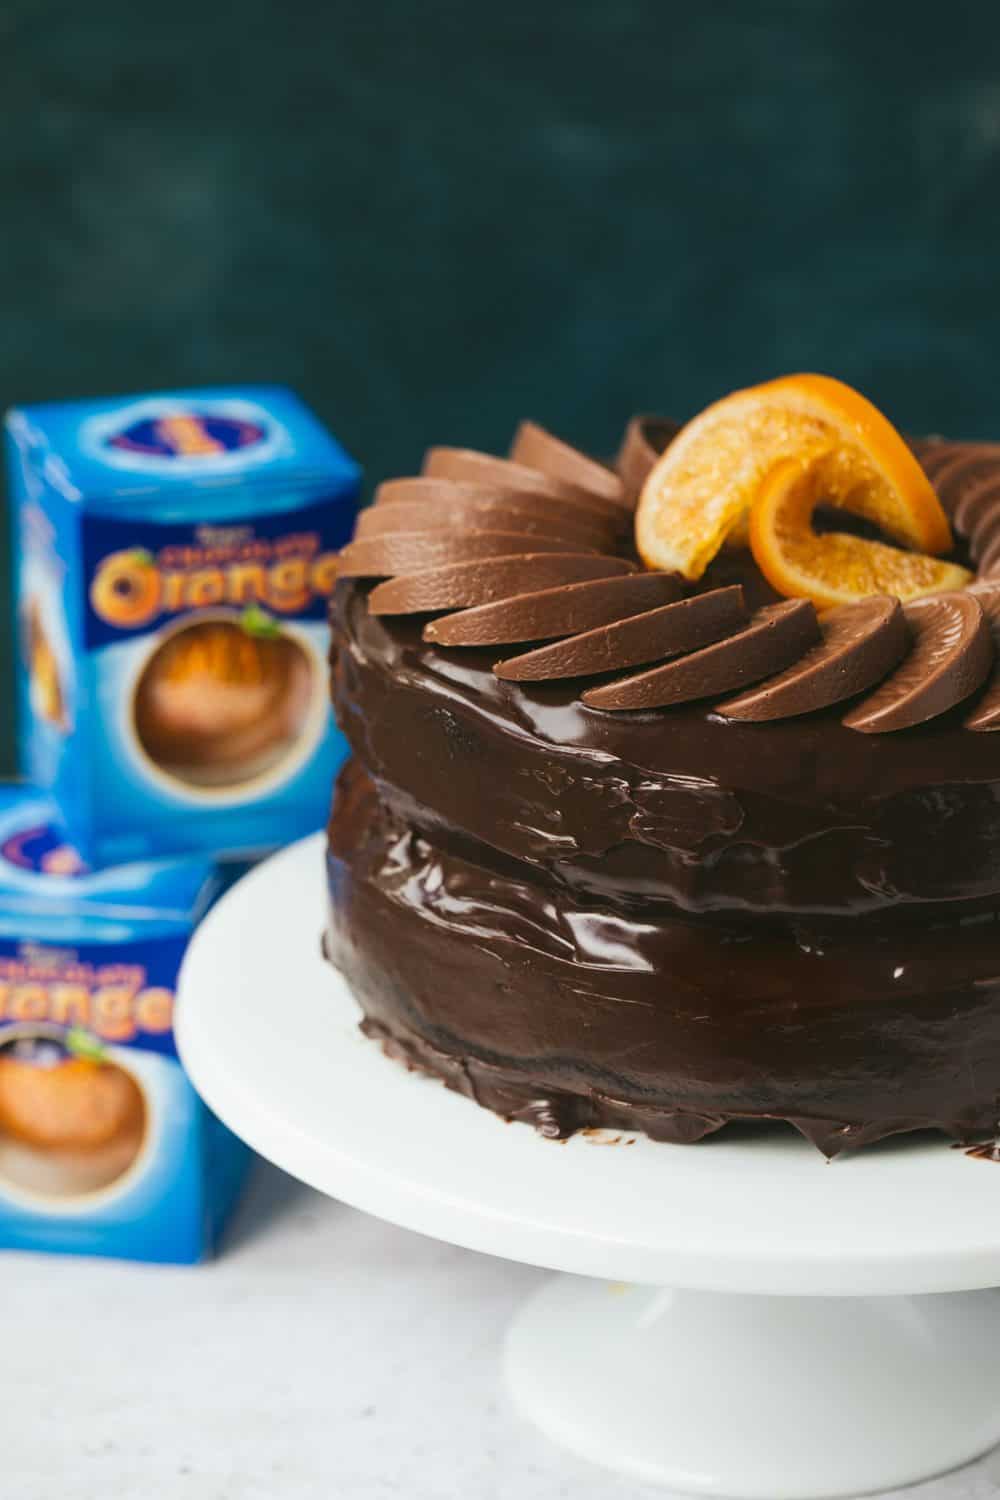 A chocolate orange cake topped with Terry's chocolate orange segments. There are 3 boxes of chocolate oranges visible in the background.